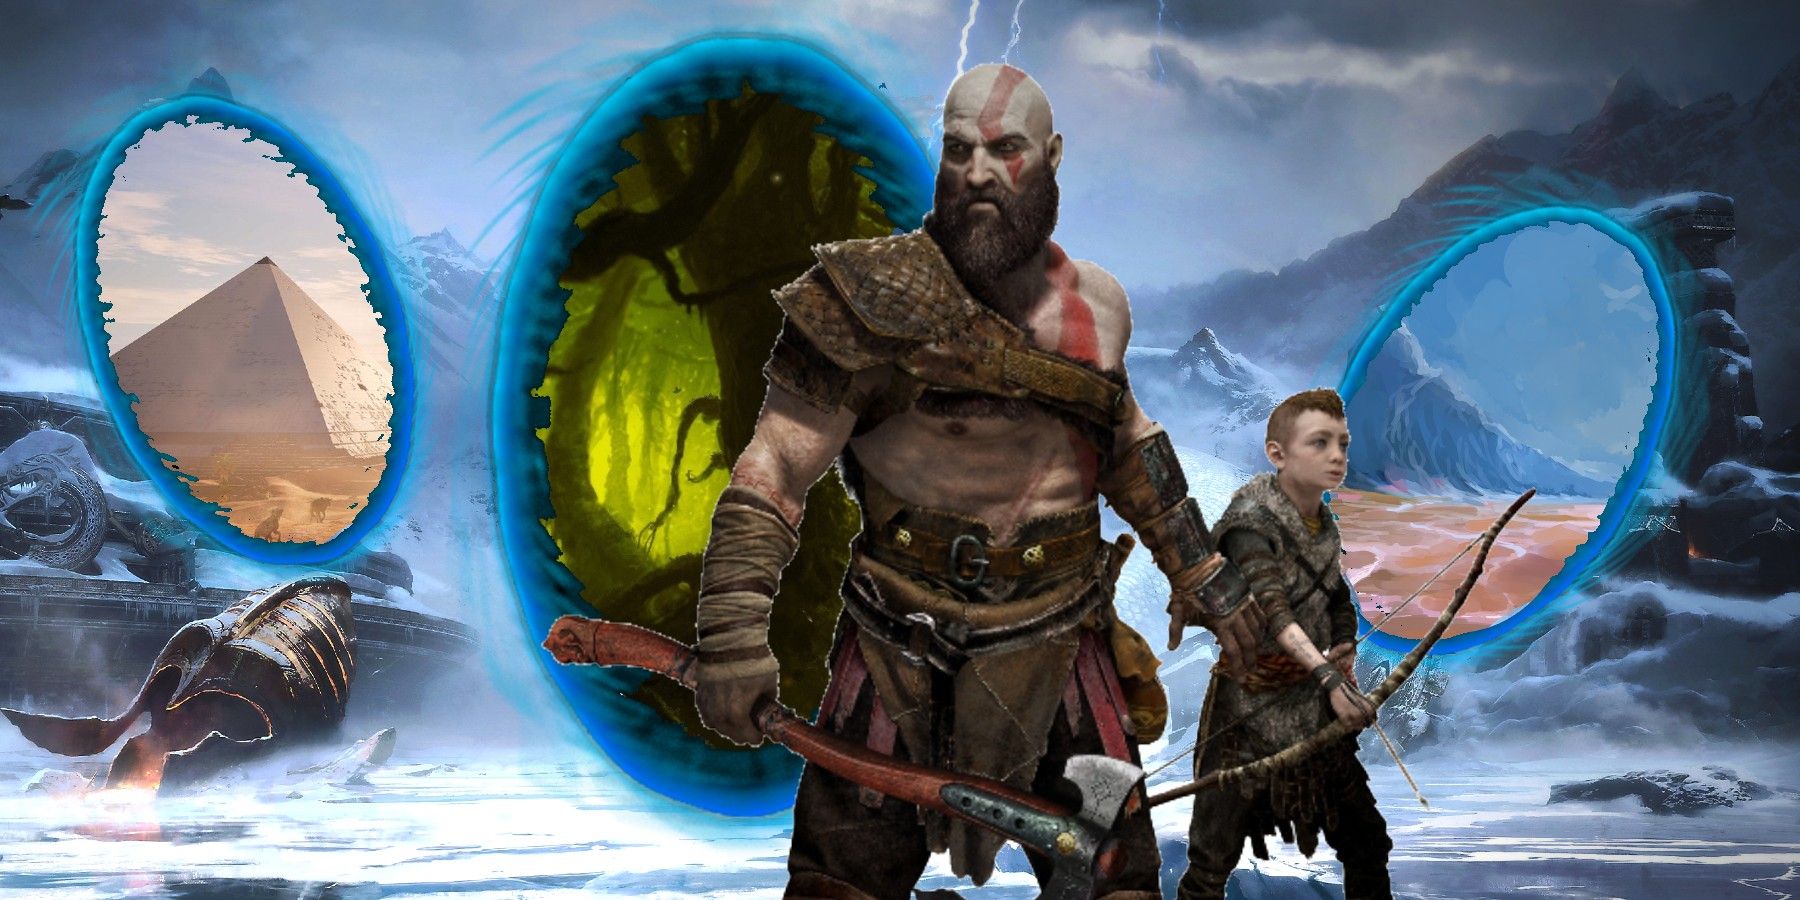 The Future of God of War